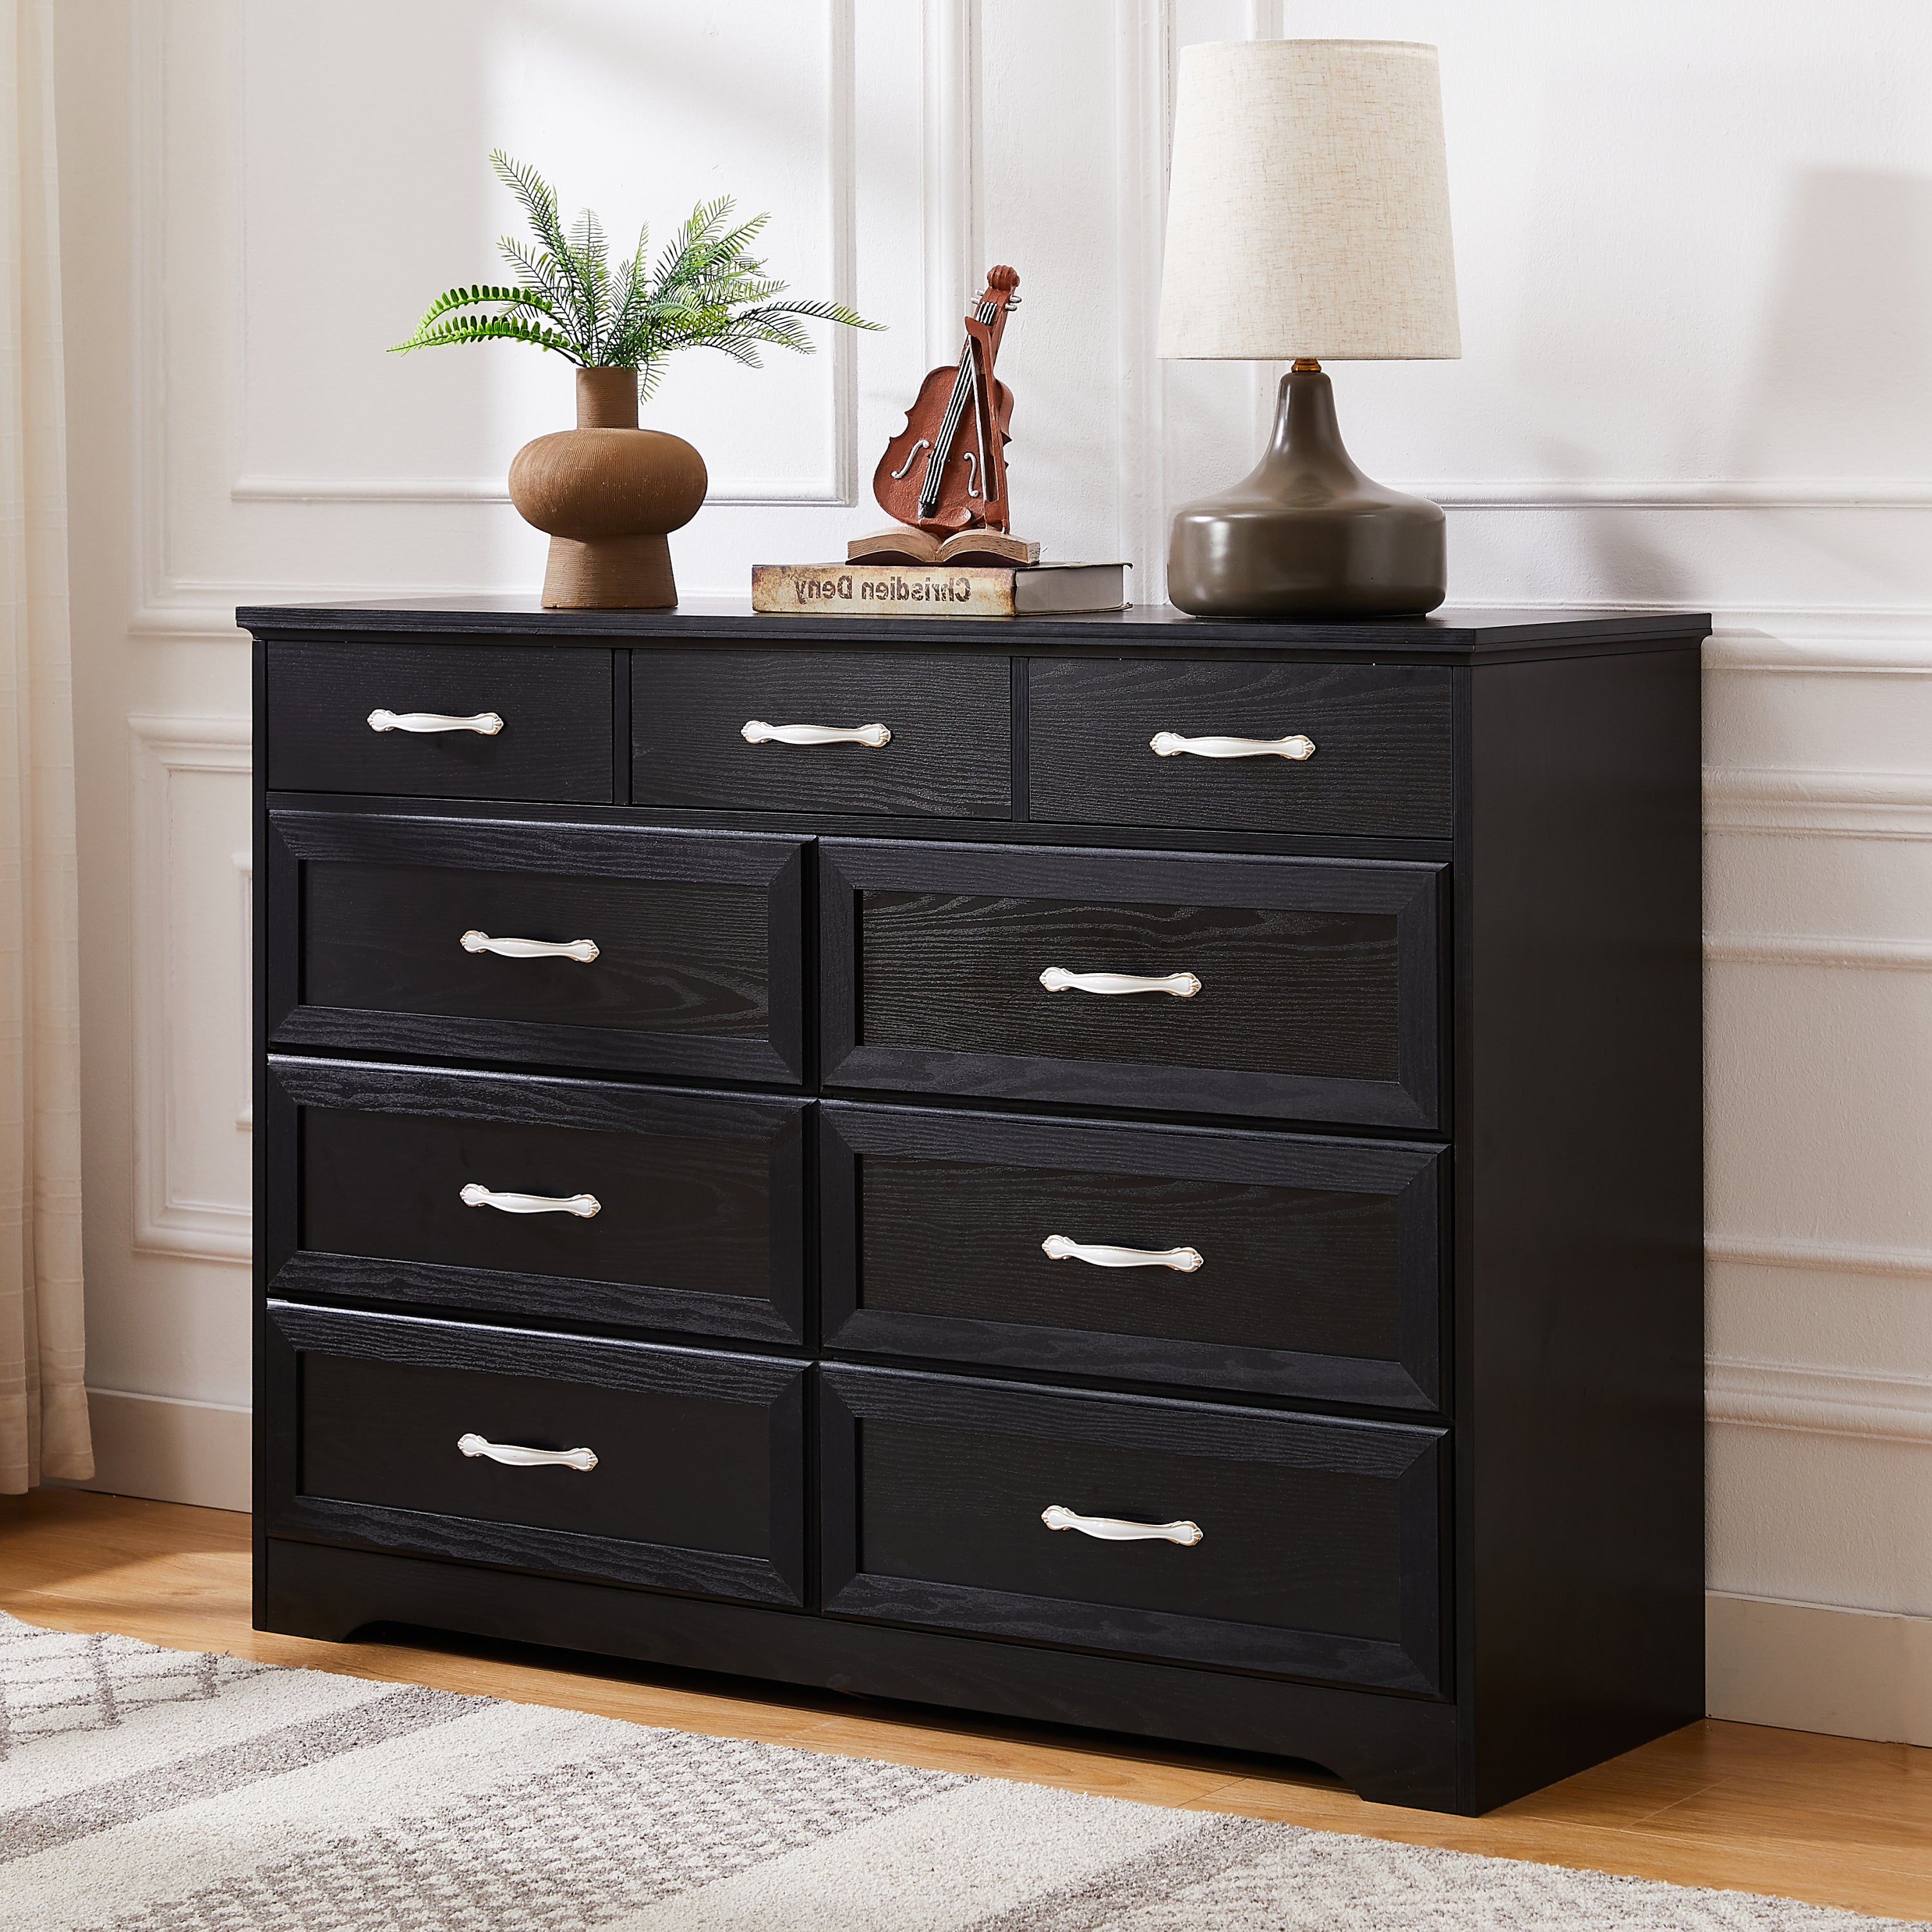 🆓🚛 Bedroom Dresser, 9 Drawer Long Dresser With Antique Handles, Wood Chest of Drawers for Kids Room, Living Room, Entry and Hallway, Black, 47.56''W X 15.75''D X 34.45''H.